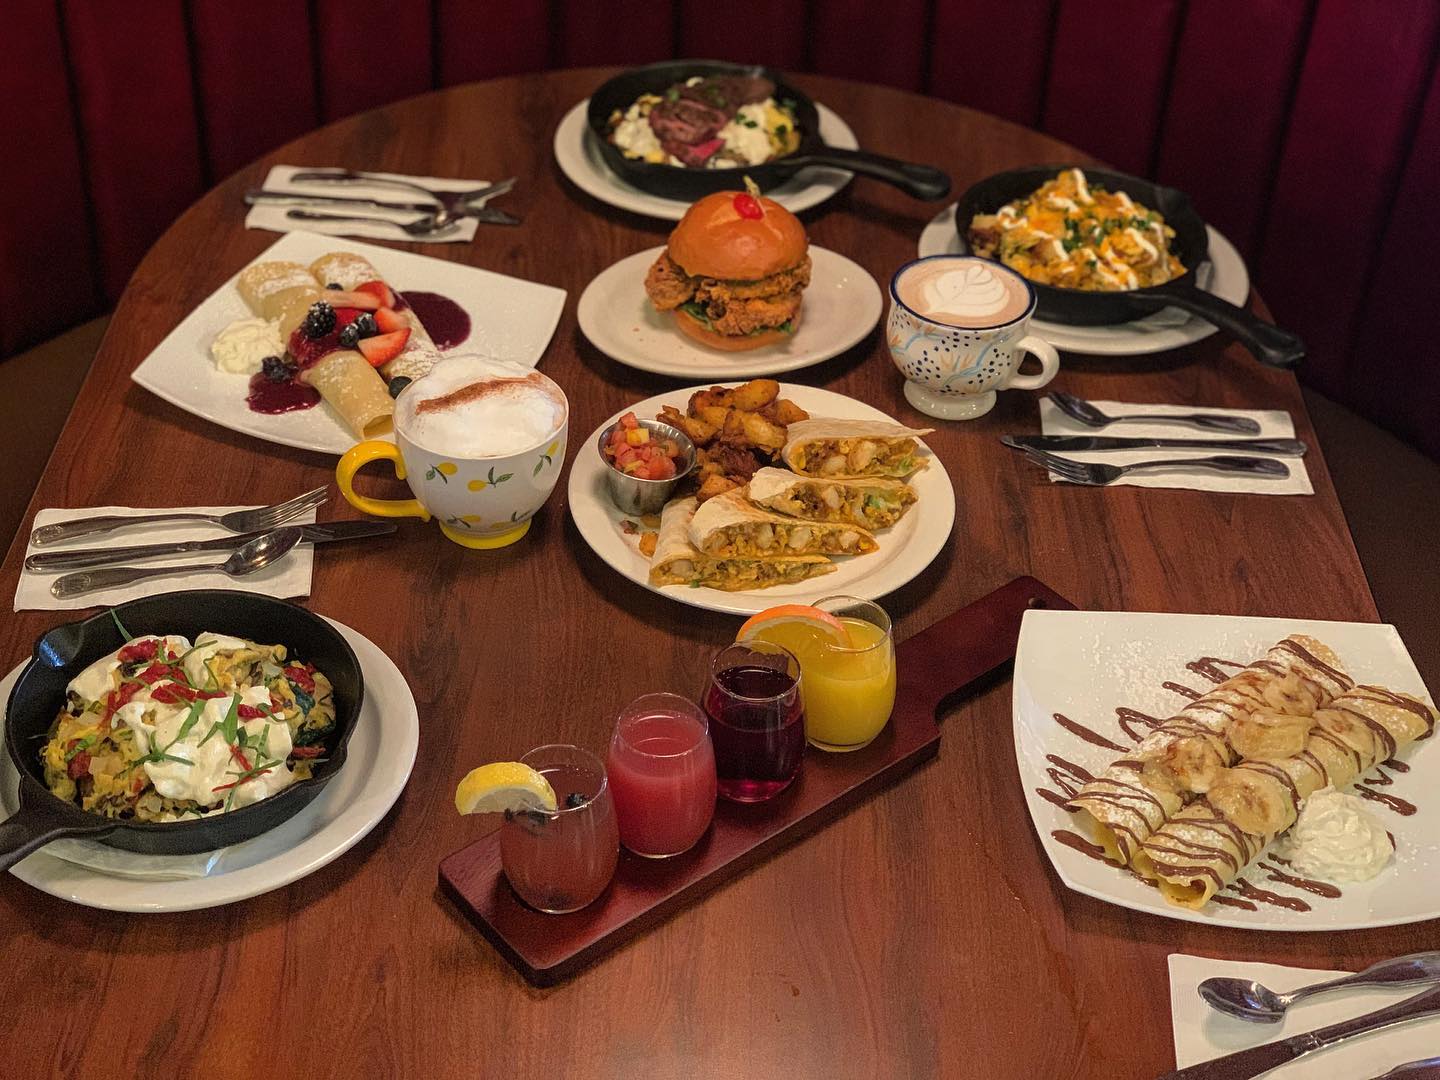 A table with 4 plates of food, two plates of desert, a rail of 4 beverages and two coffee beverages on display